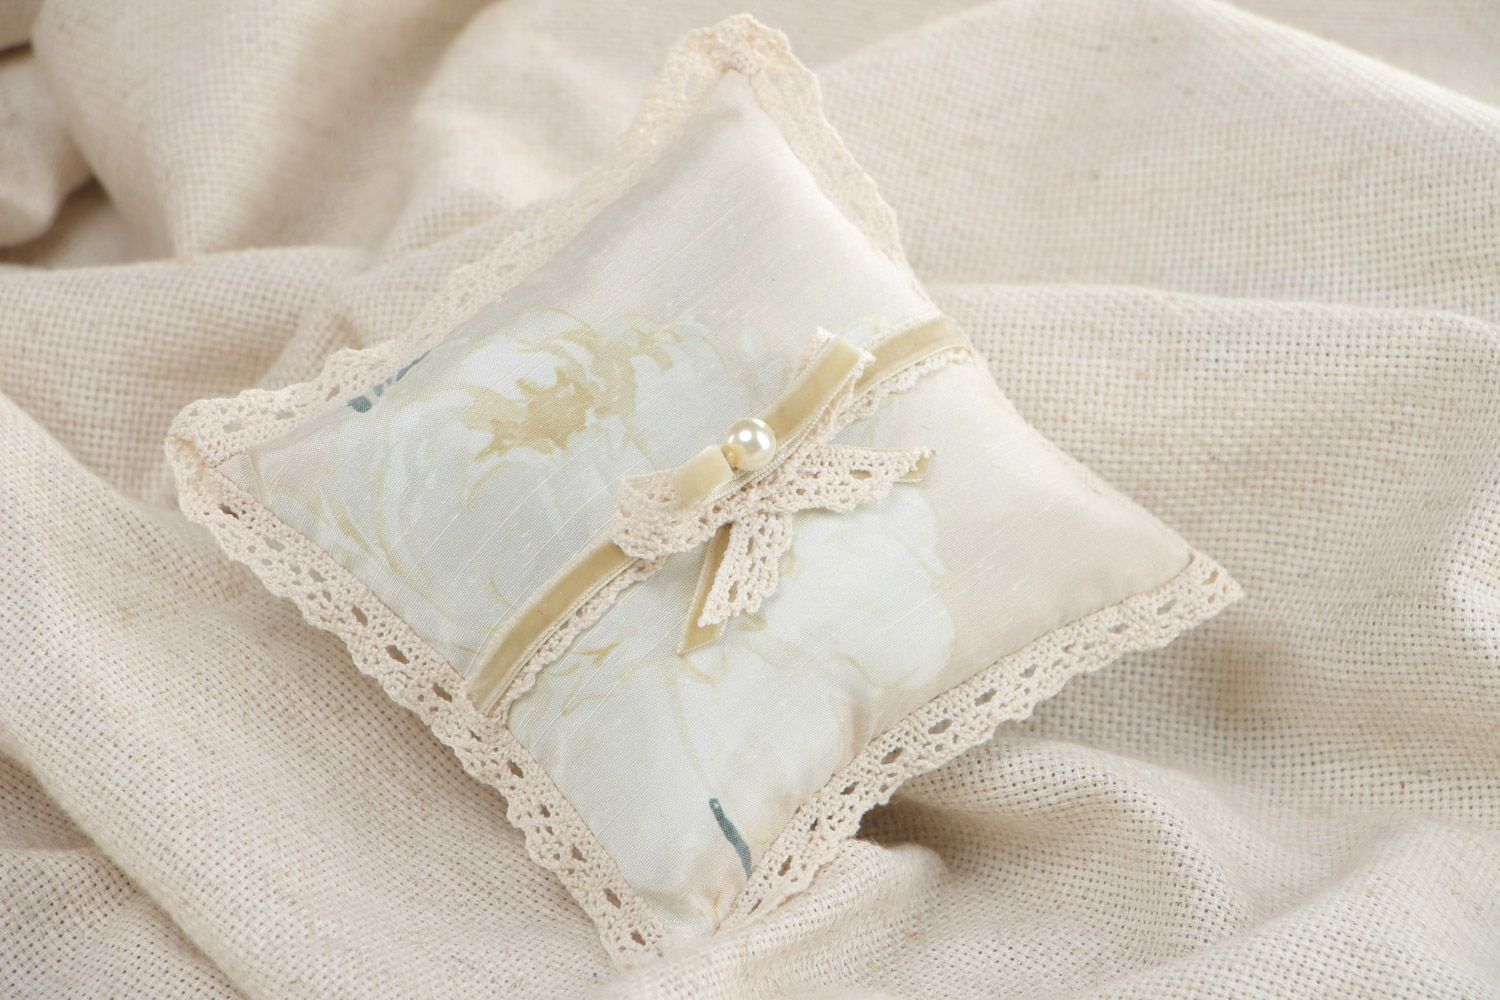 Handmade wedding ring bearer pillow sewn of ivory-colored silk fabric with bow photo 1